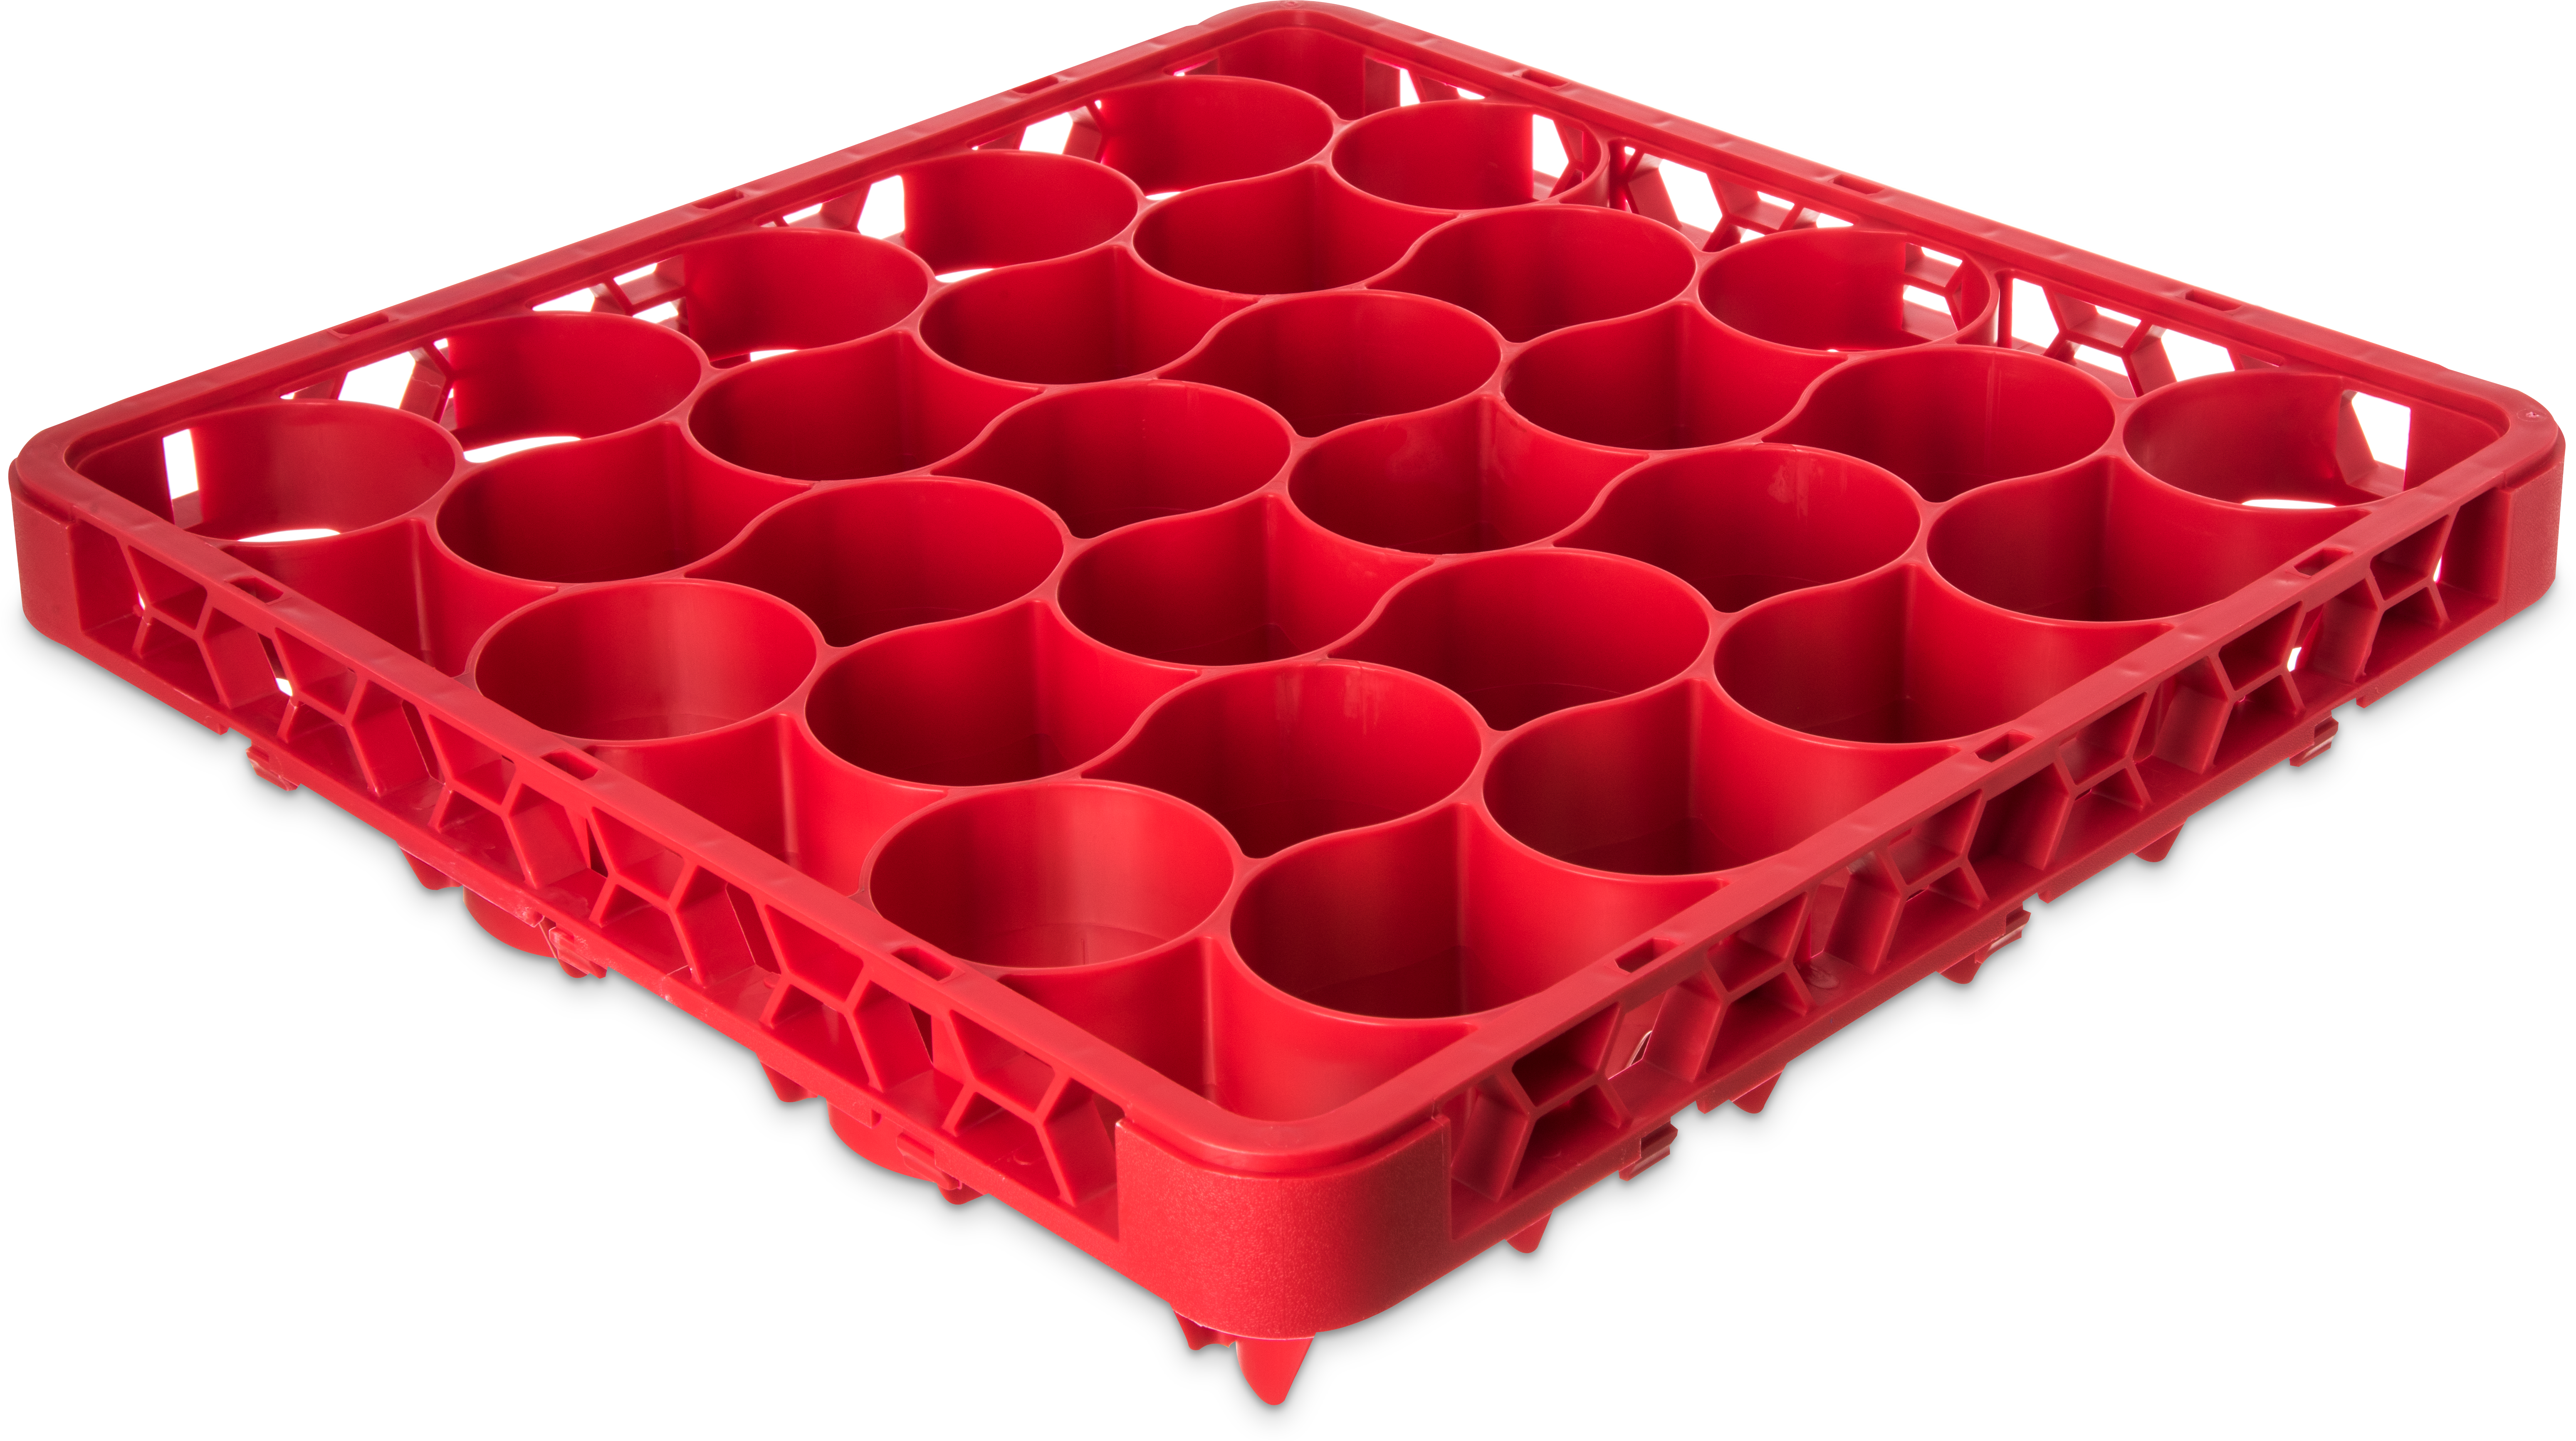 OptiClean NeWave Color-Coded Long Glass Rack Extender 30 Compartment - Red